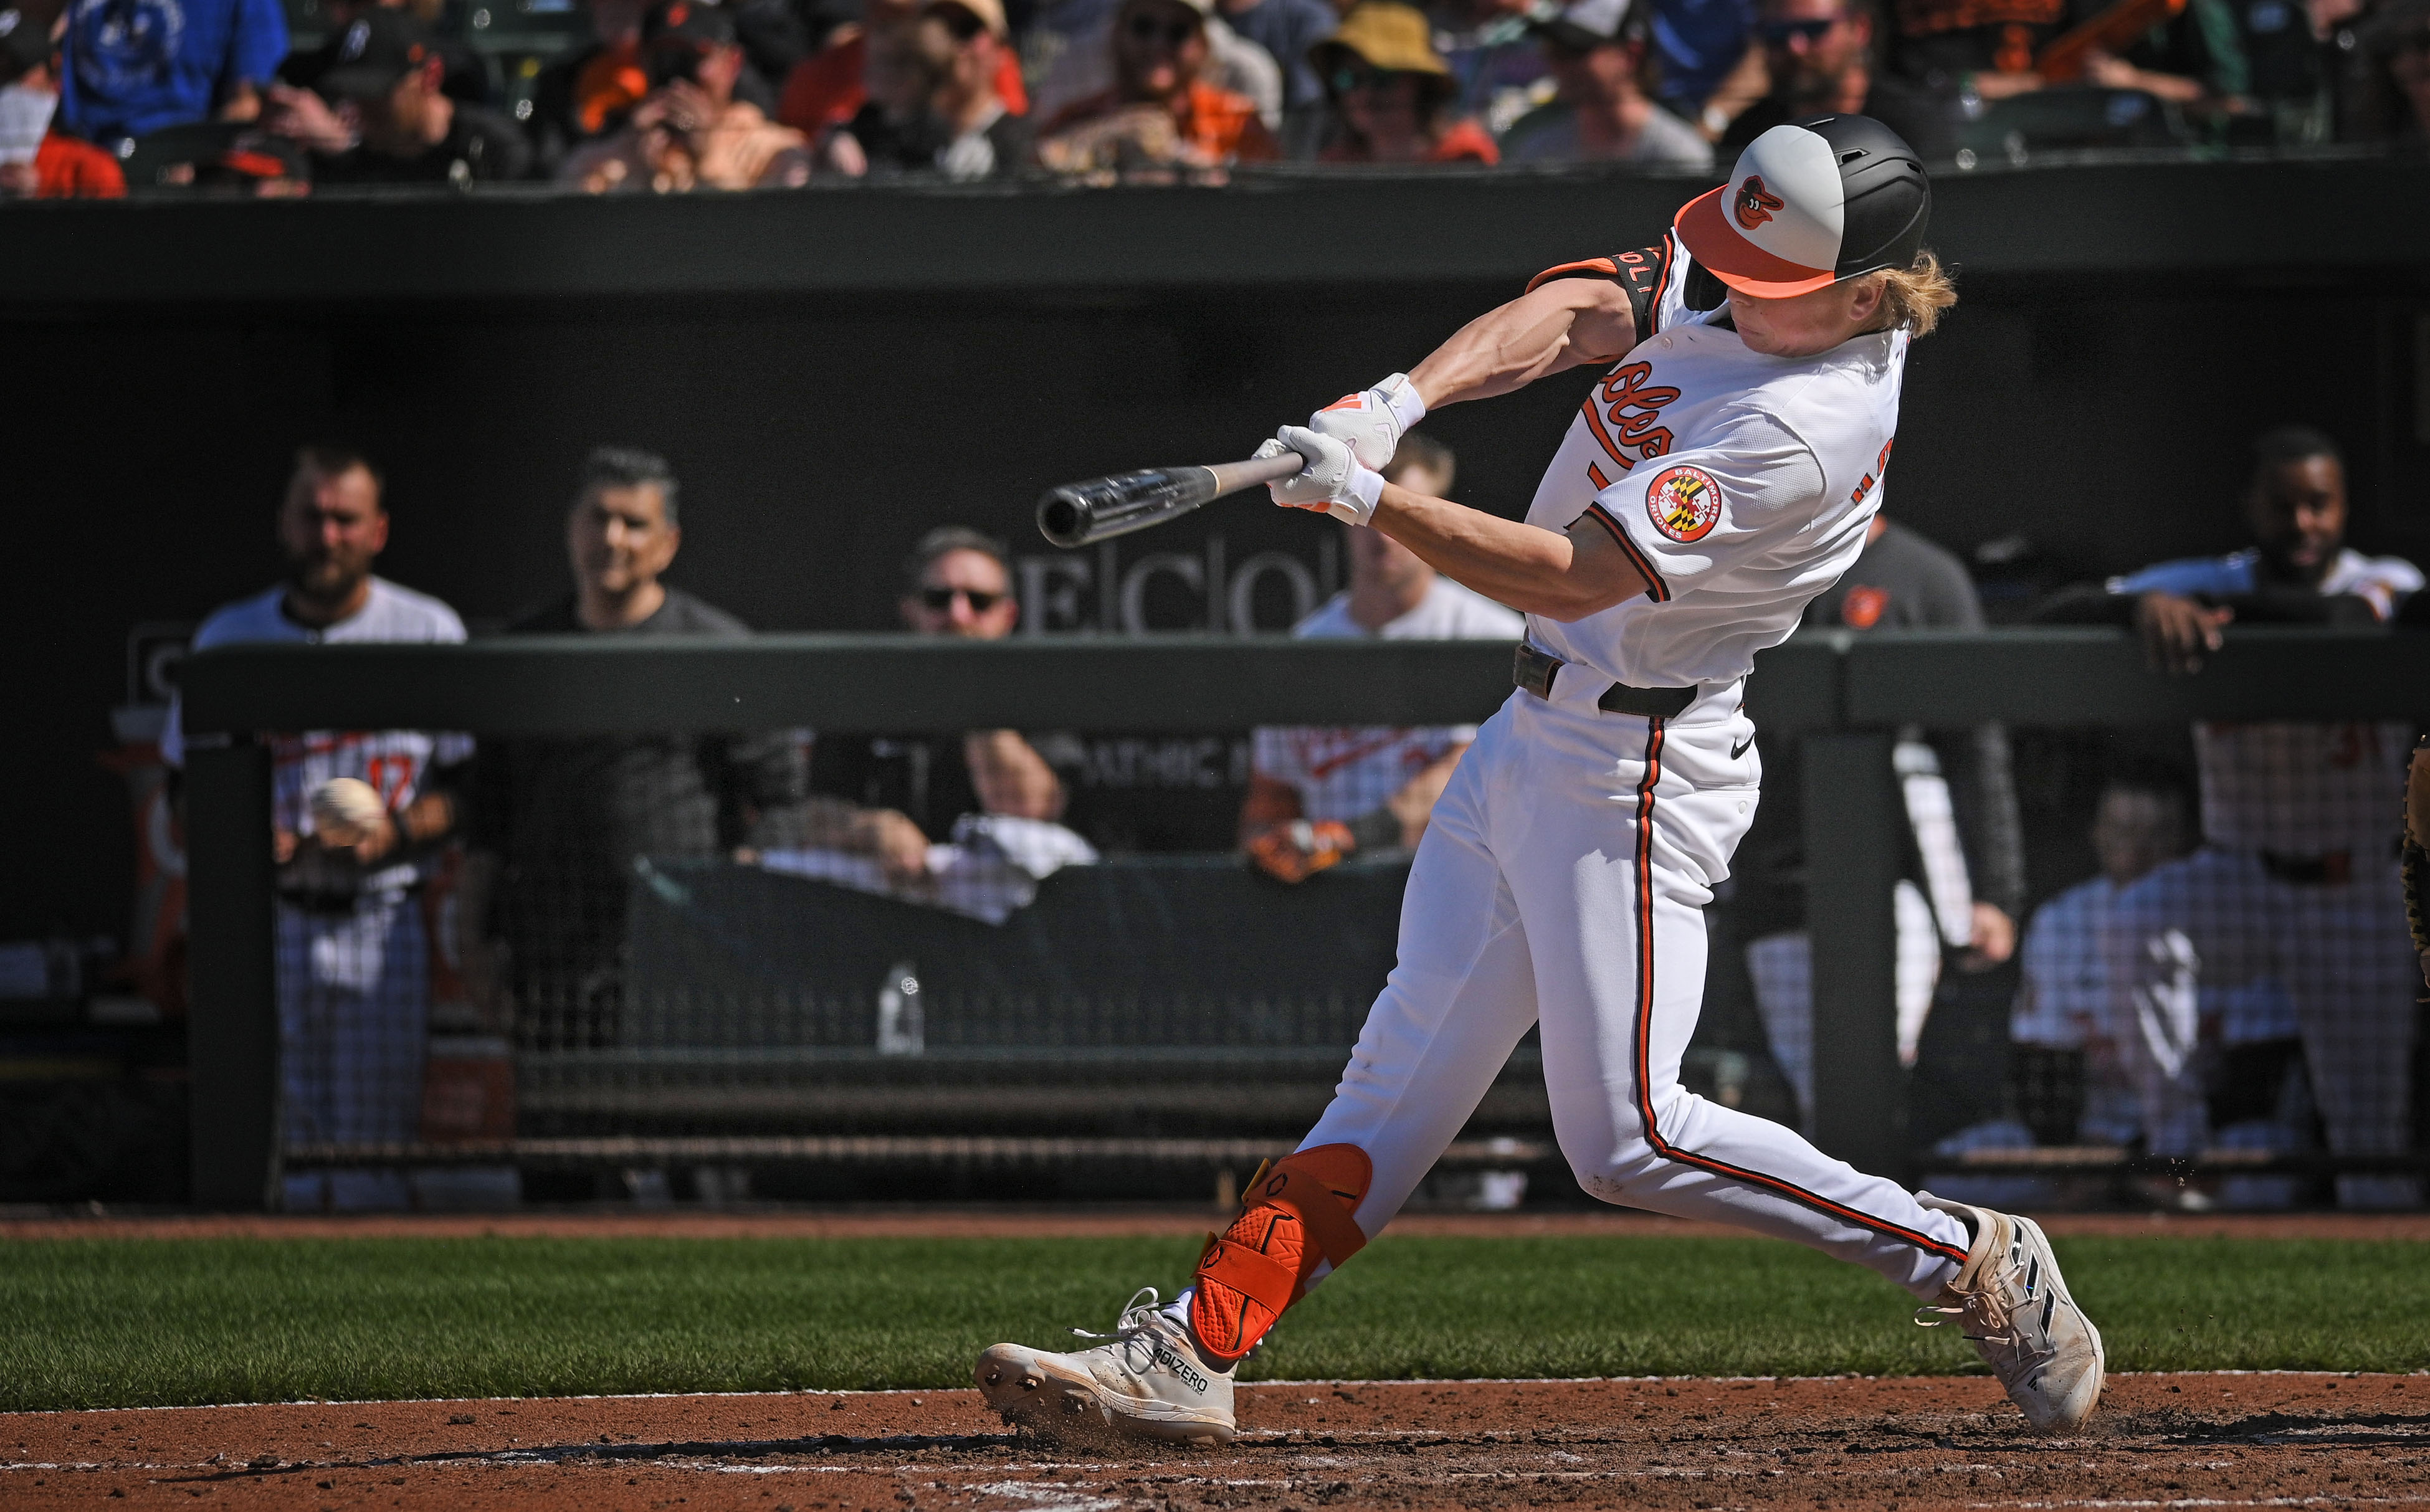 Orioles' Jackson Holliday singles against the Brewers in the seventh inning for his first career Major League base hit. Orioles defeated the Brewers 6-4 at Oriole Park at Camden Yards. (Kenneth K. Lam/Staff)